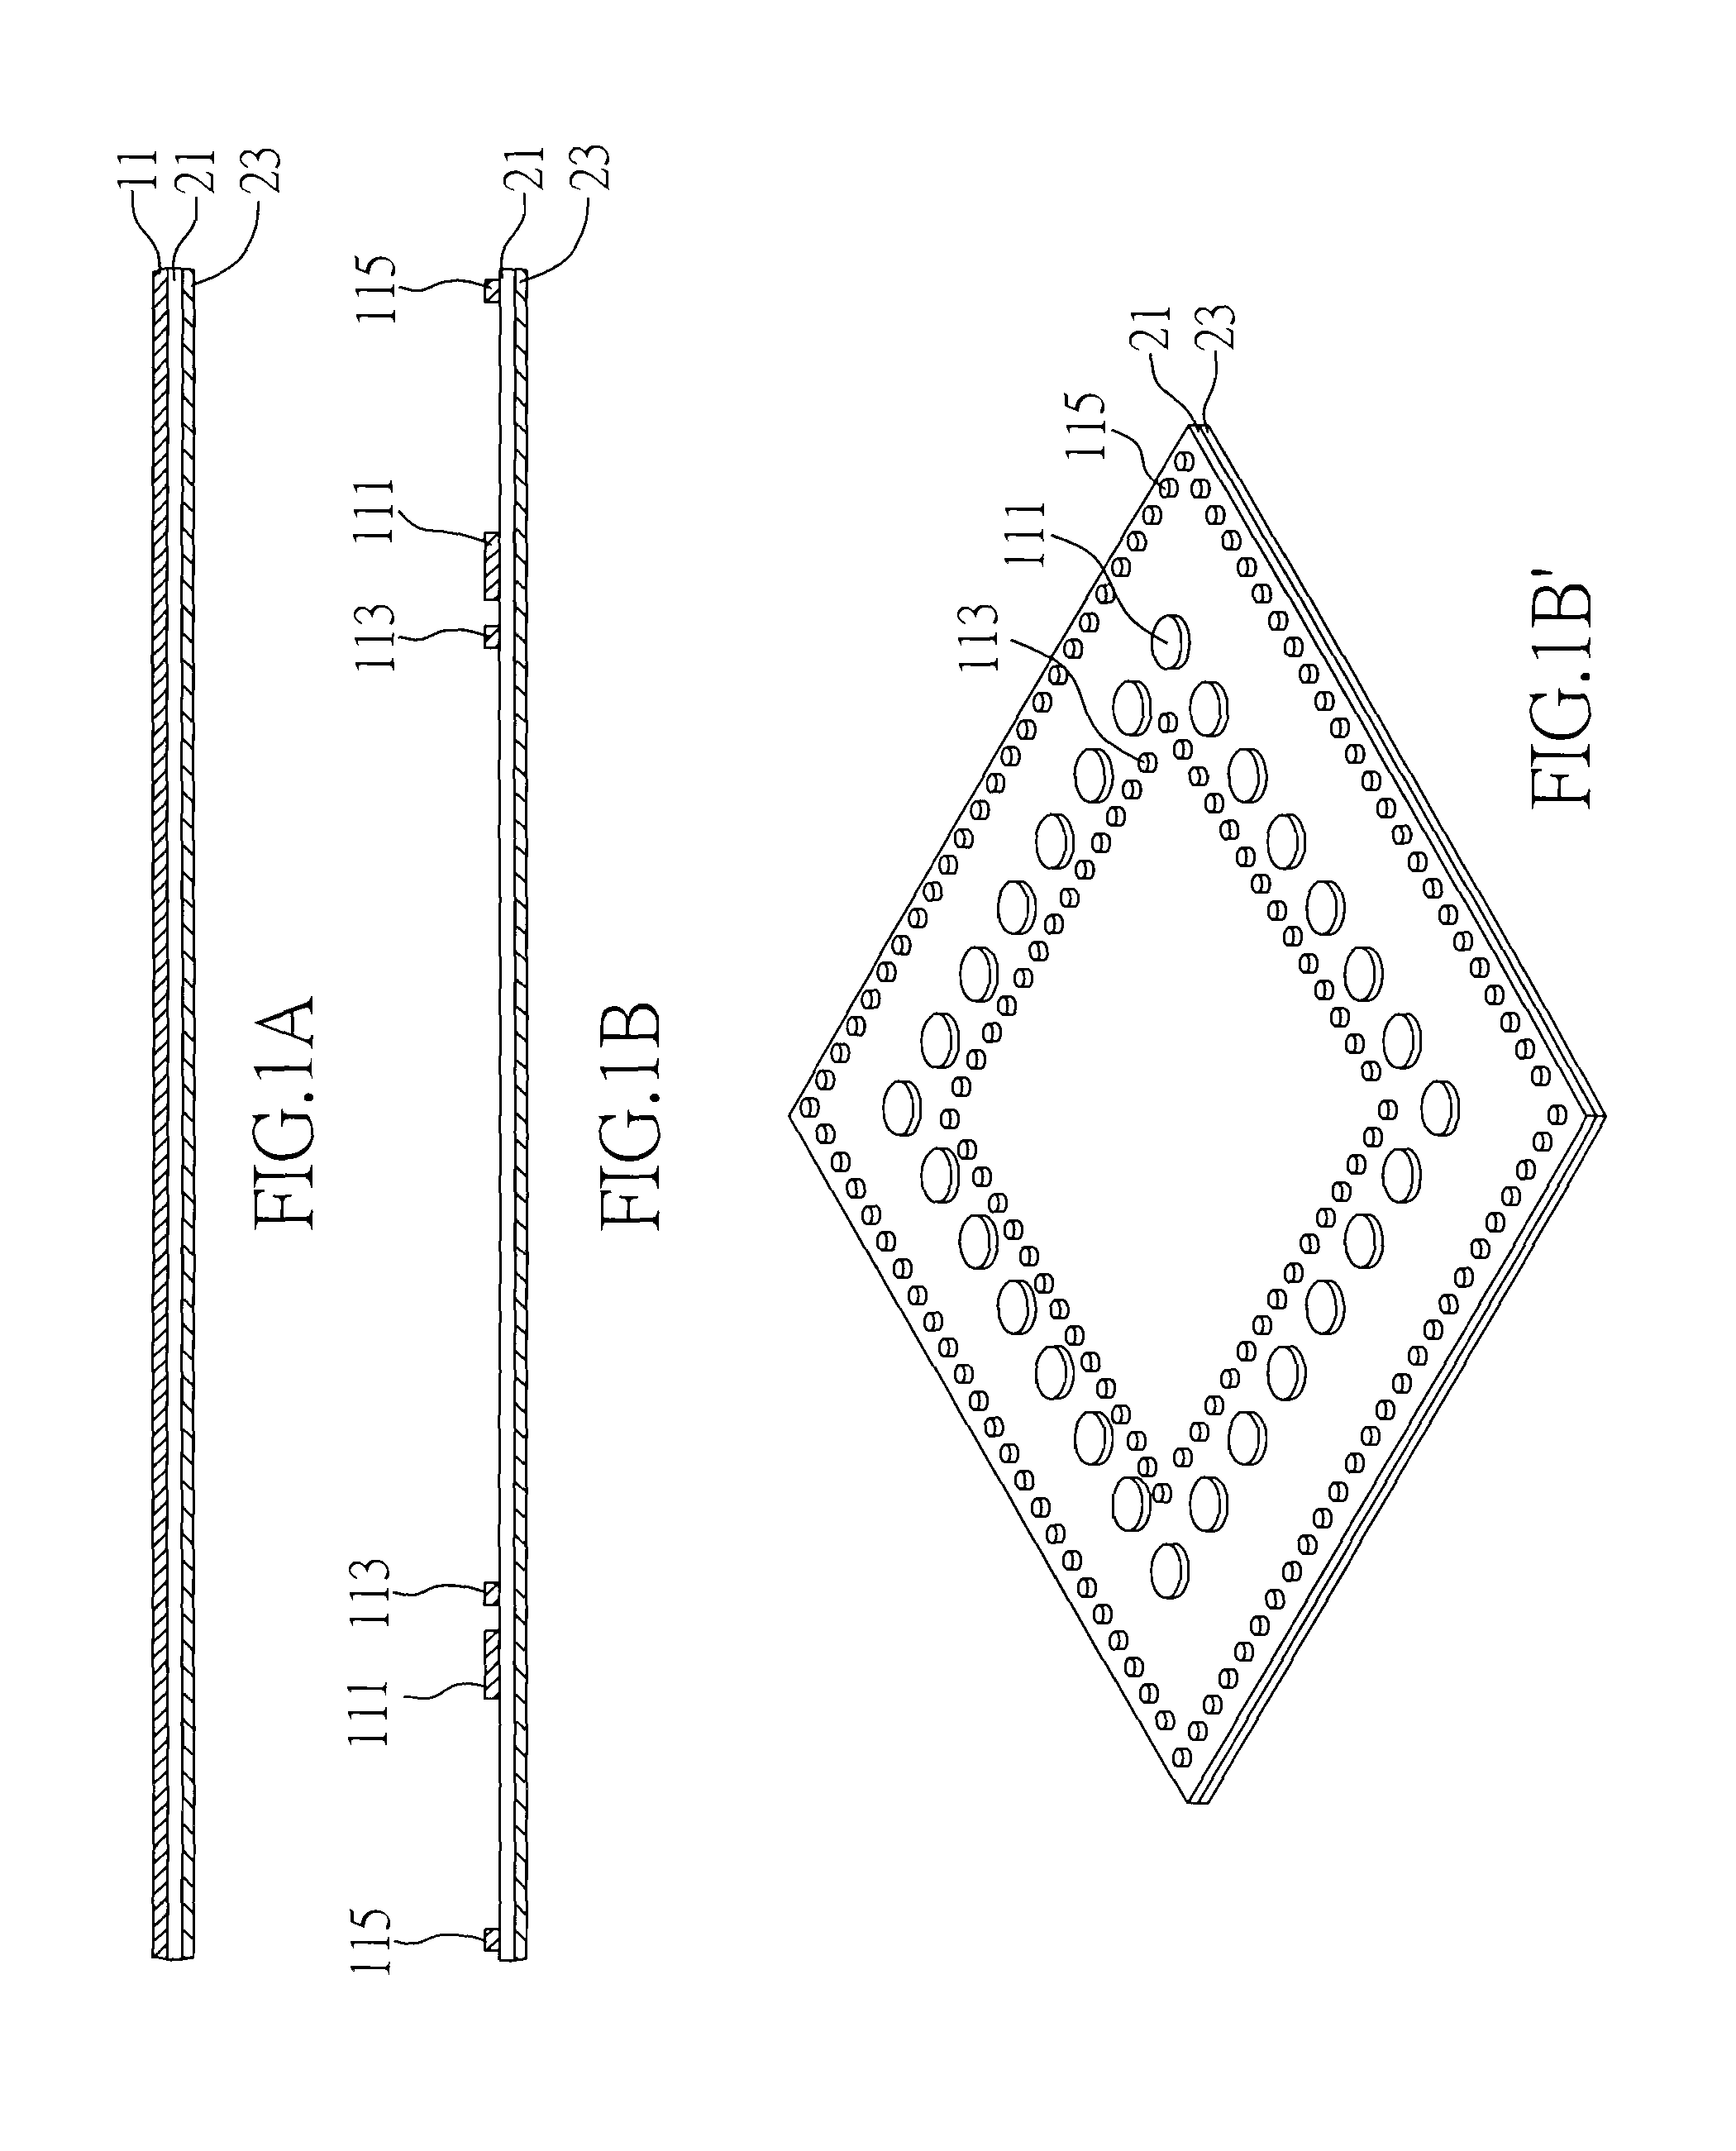 Semiconductor assembly with dual connecting channels between interposer and coreless substrate